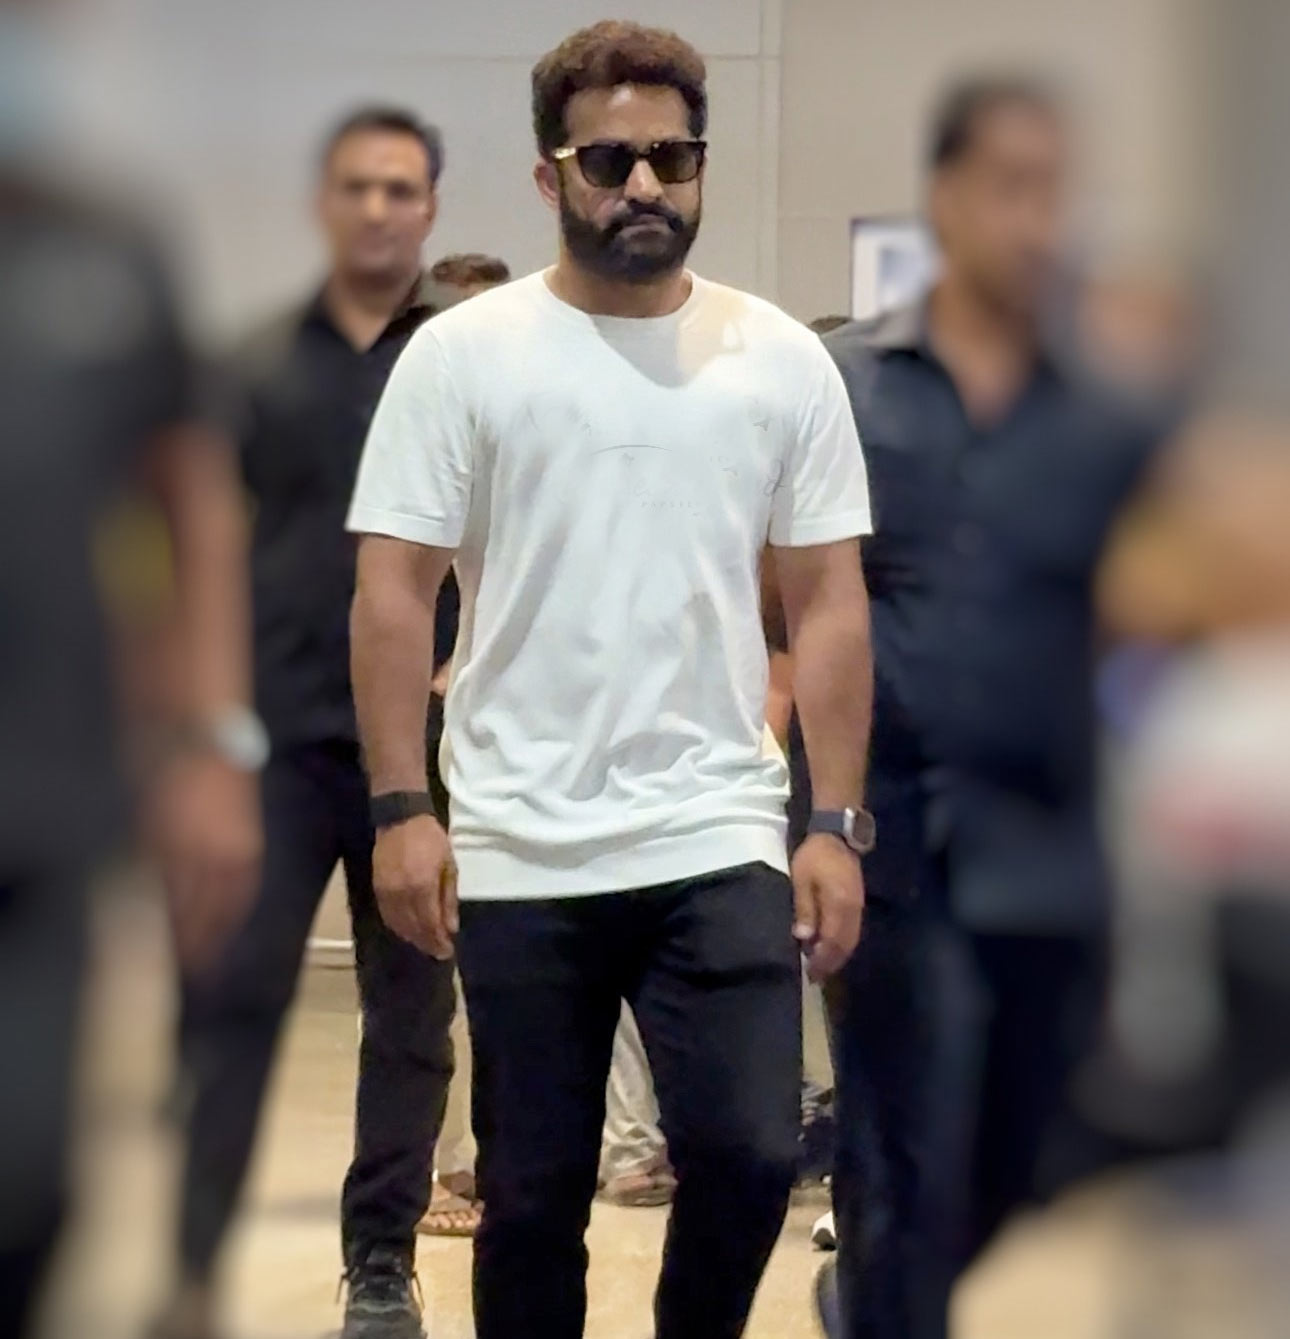 NTR returns from Thailand